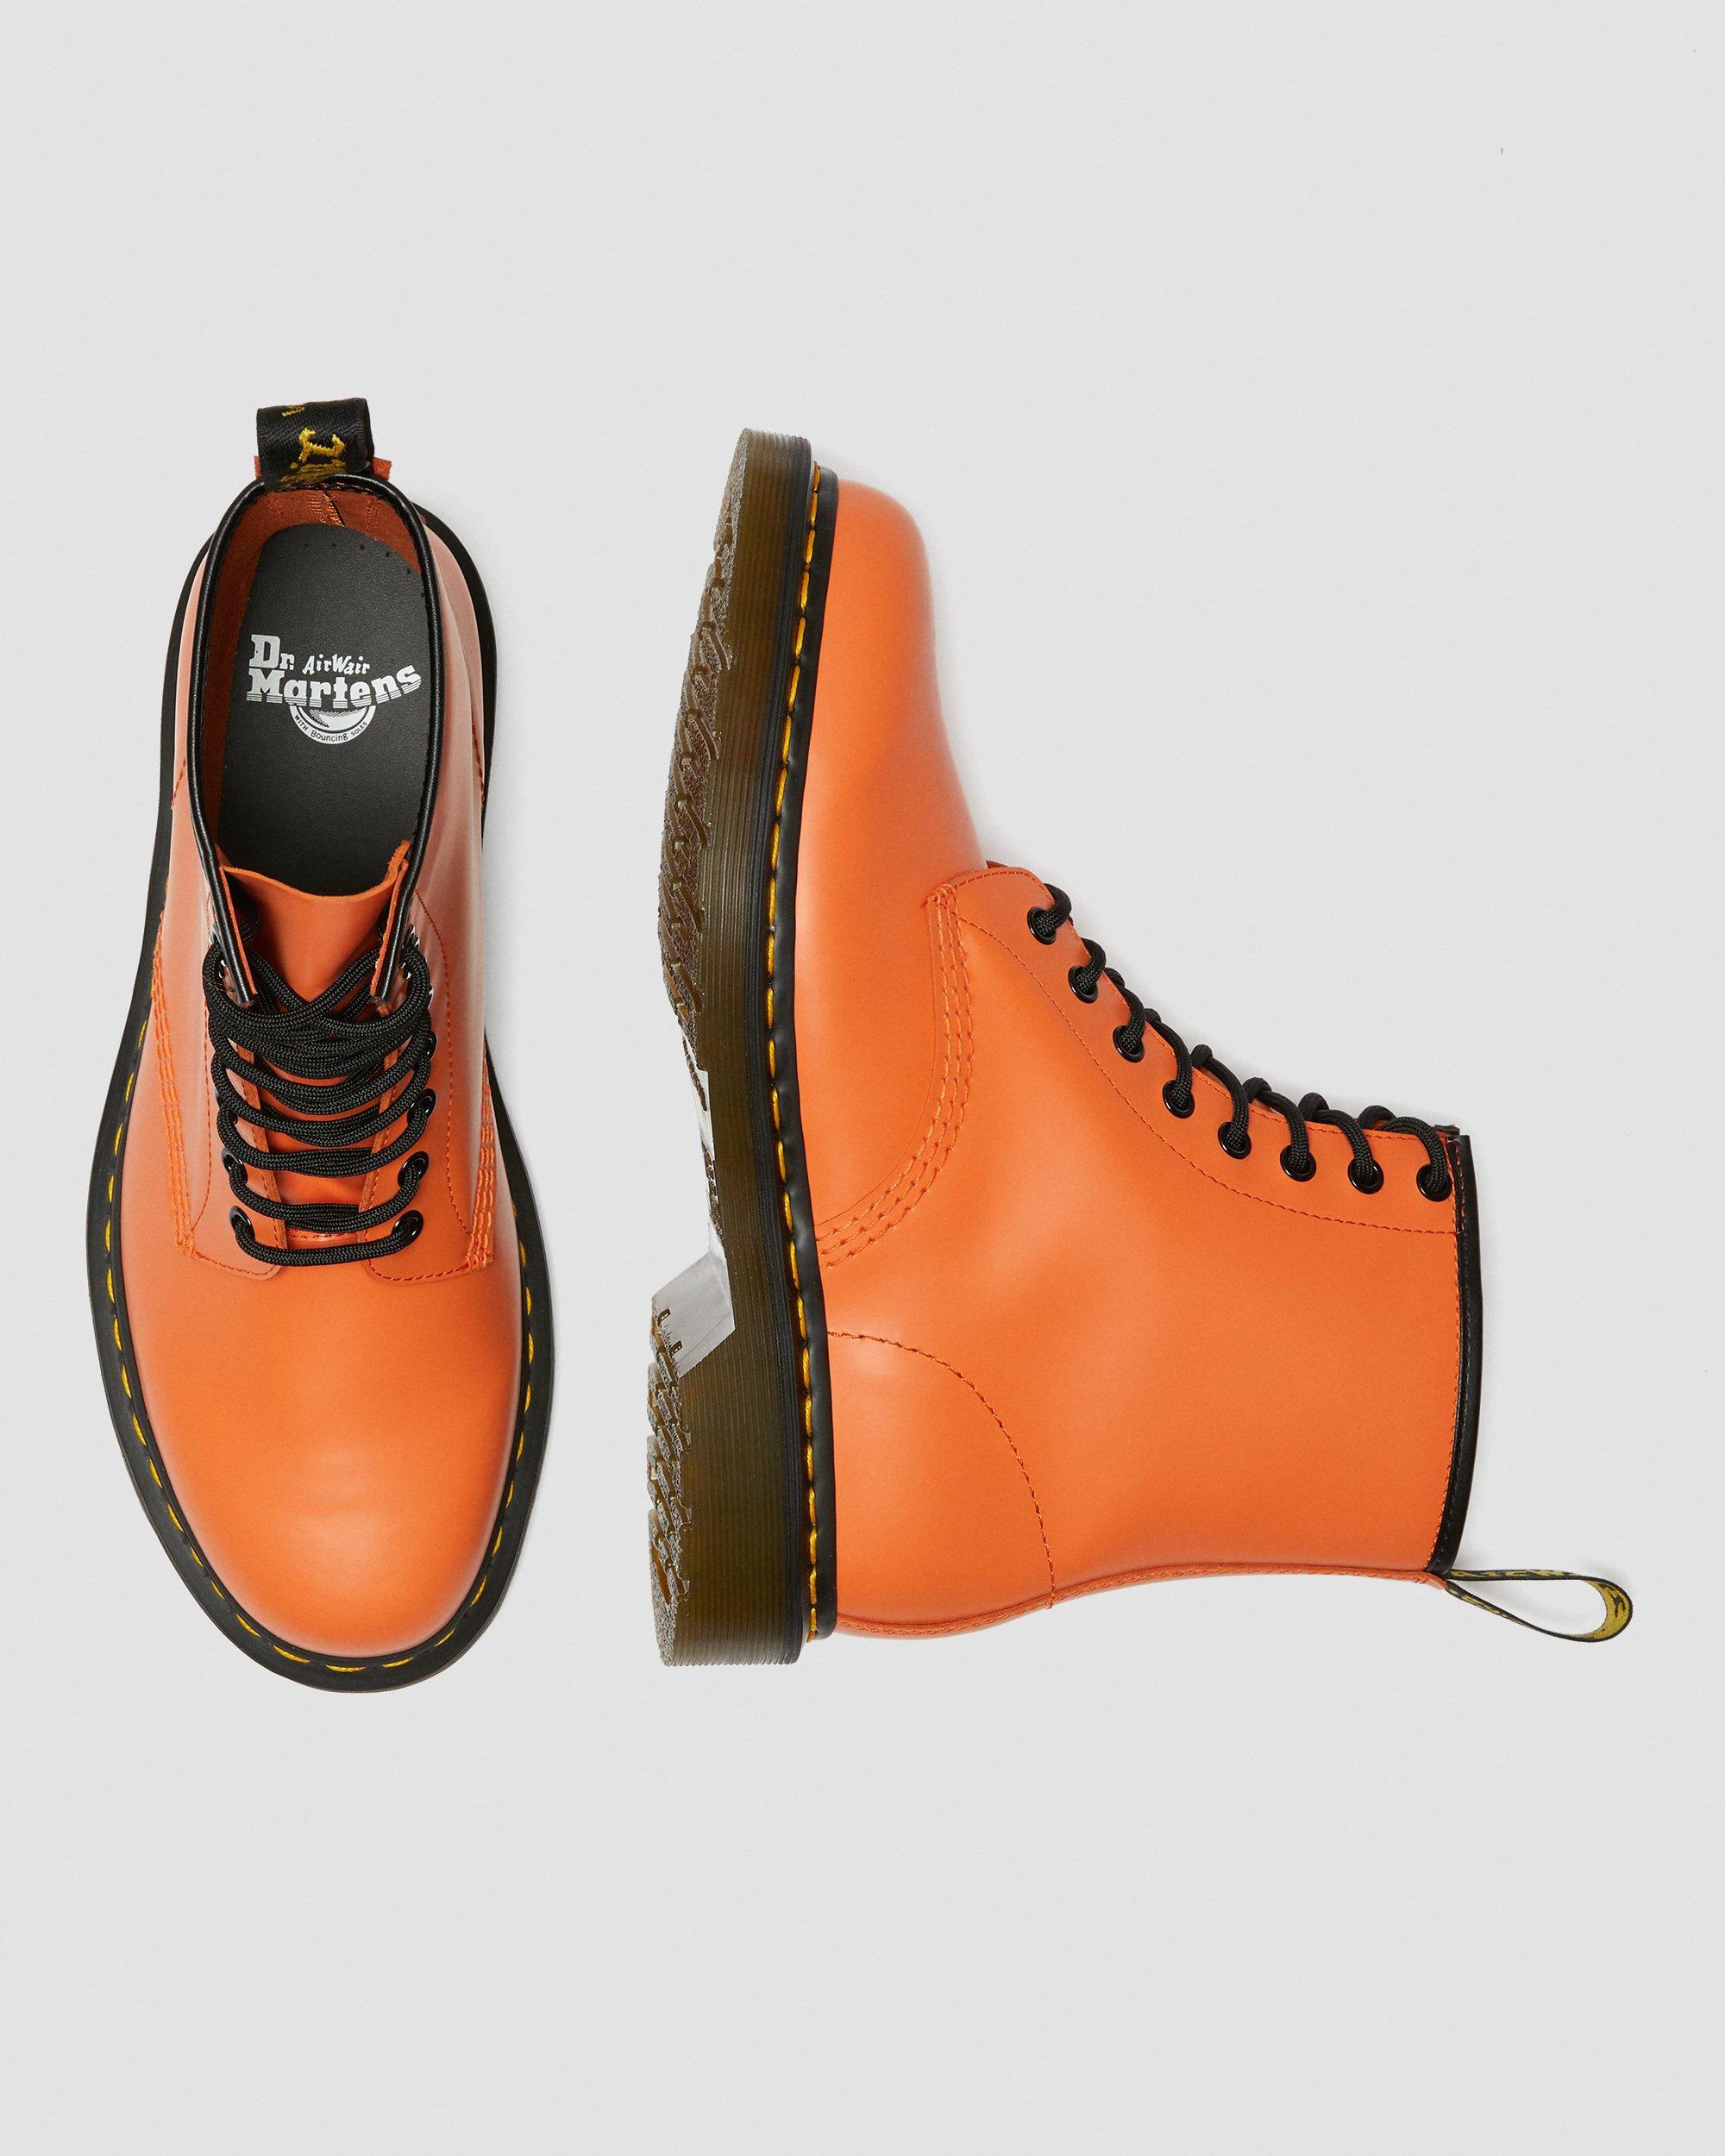 voormalig haat hongersnood 1460 Smooth Leather Lace Up Boots | Dr. Martens